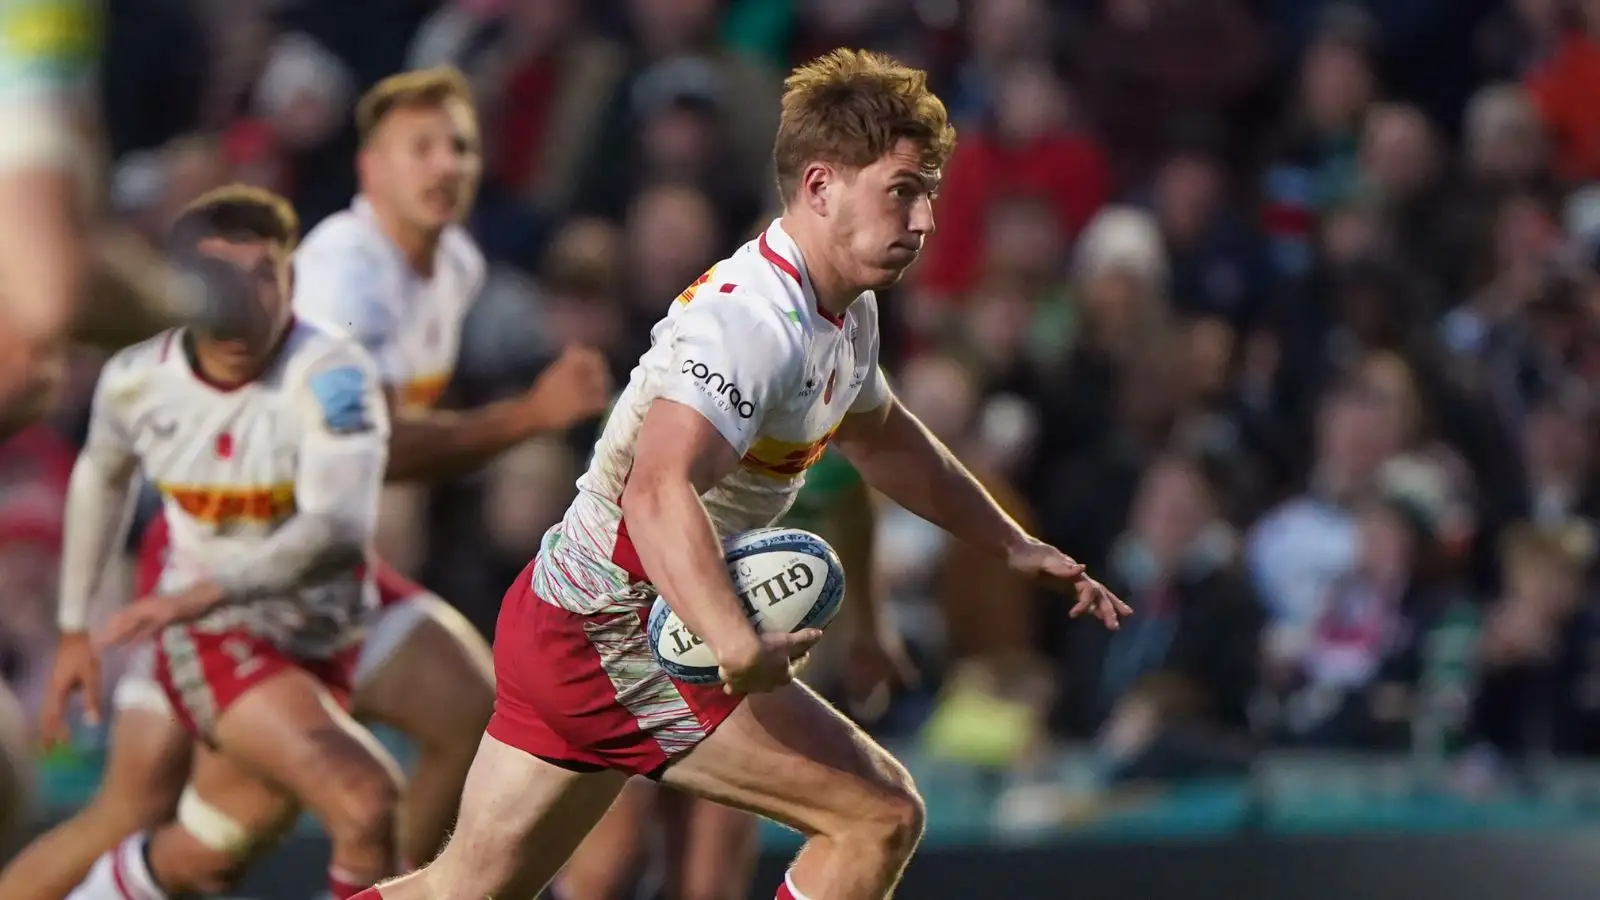 Harlequins' Will Porter breaks through to score a try during the Gallagher Premiership match at the Mattioli Woods Welford Road Stadium